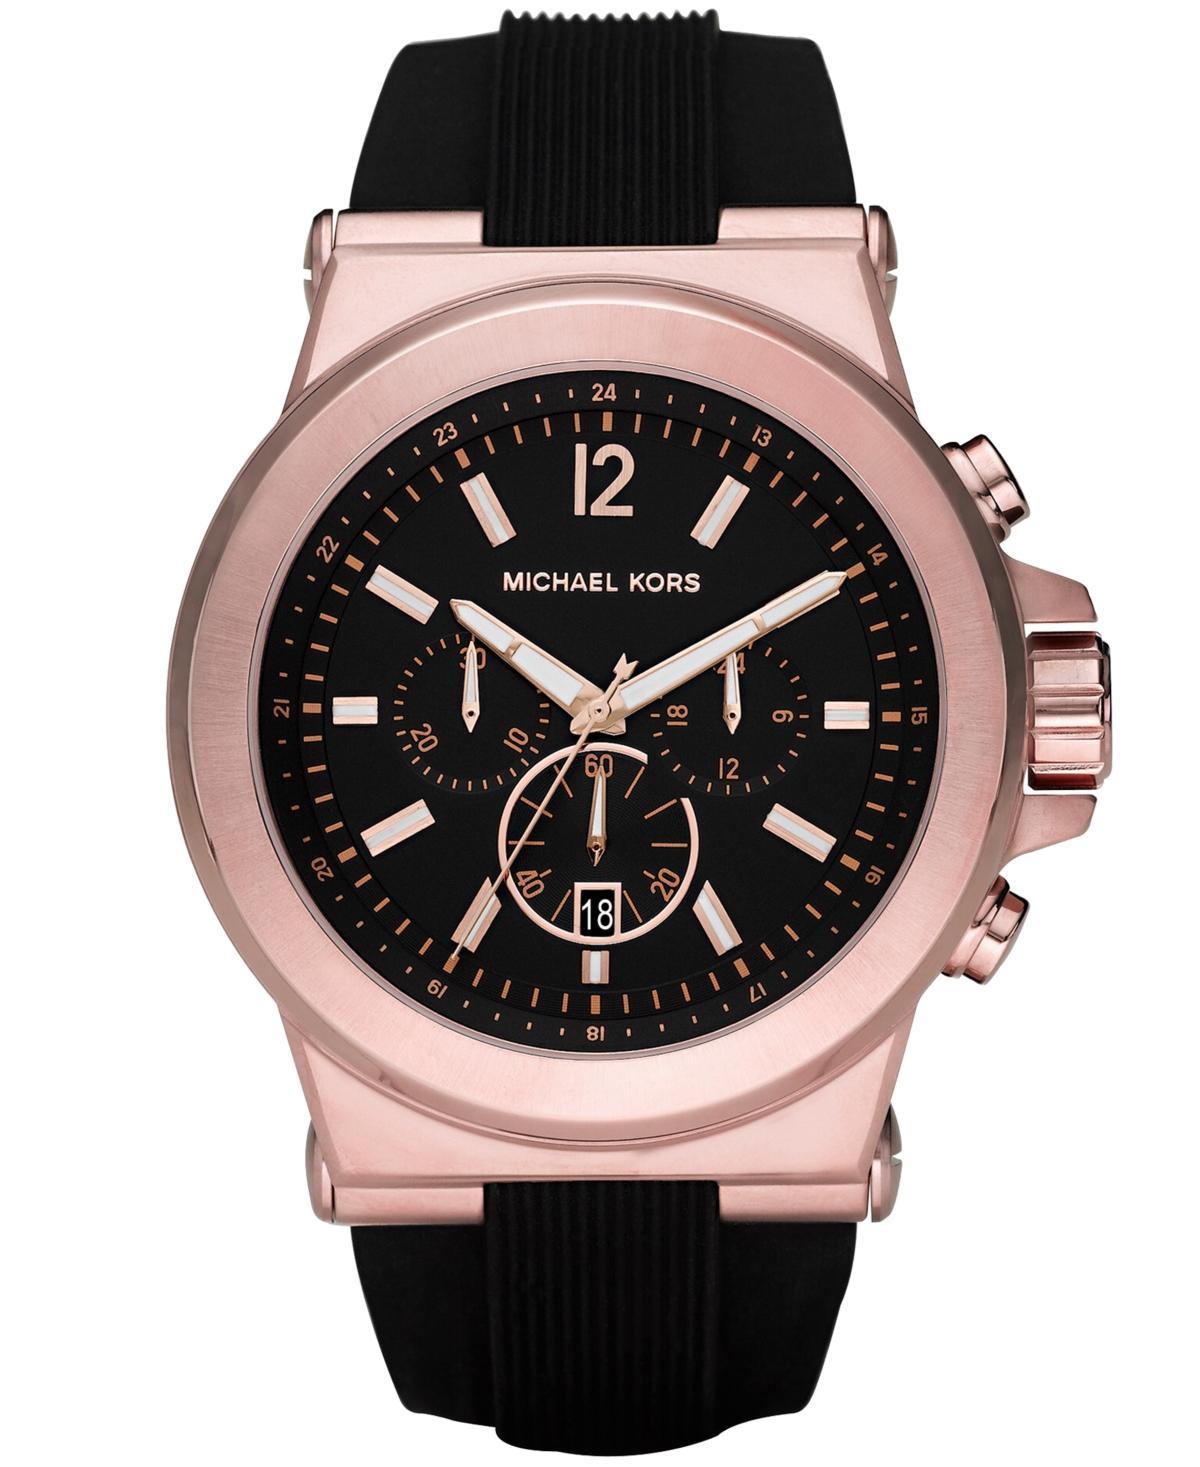 Michael Kors Mens Dylan Chronograph Black Silicone Watch Product Image